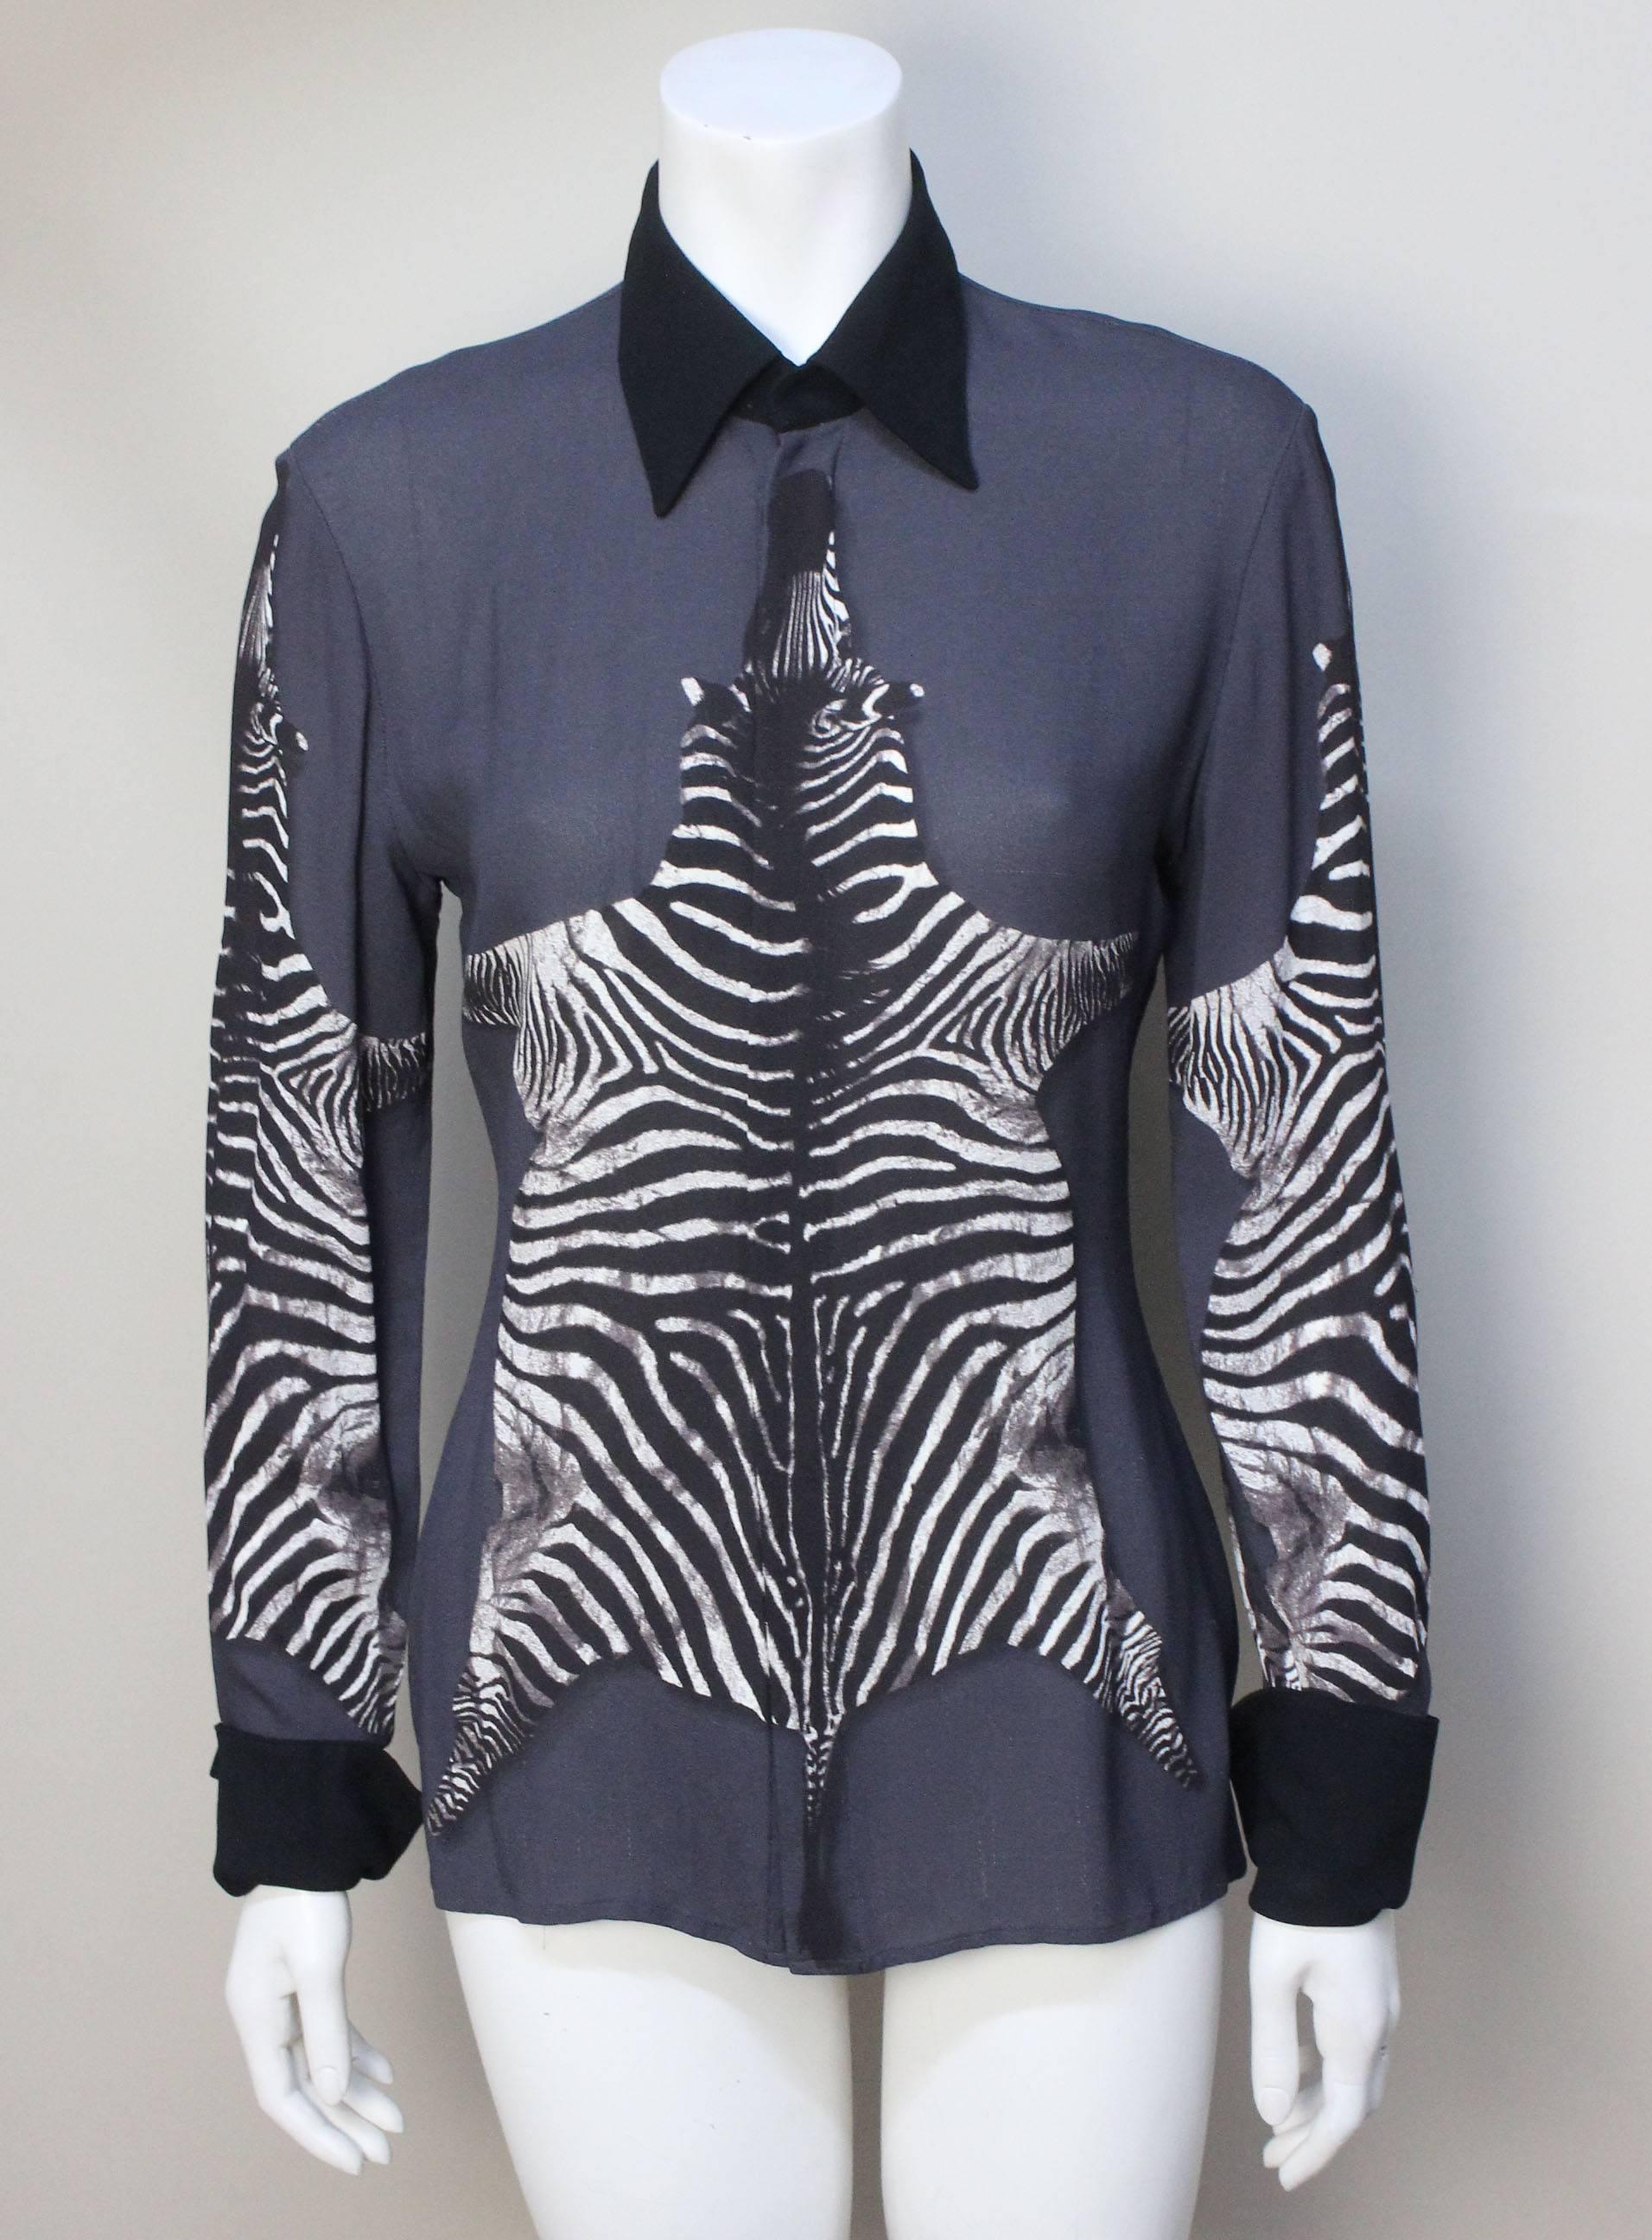 This sexy sheer blouse has a graphic of a zebra skin centered on the front and back as well as the sleeves. It has solid black crepe collar and cuffs that are a contrast to the sheerness of the top. 